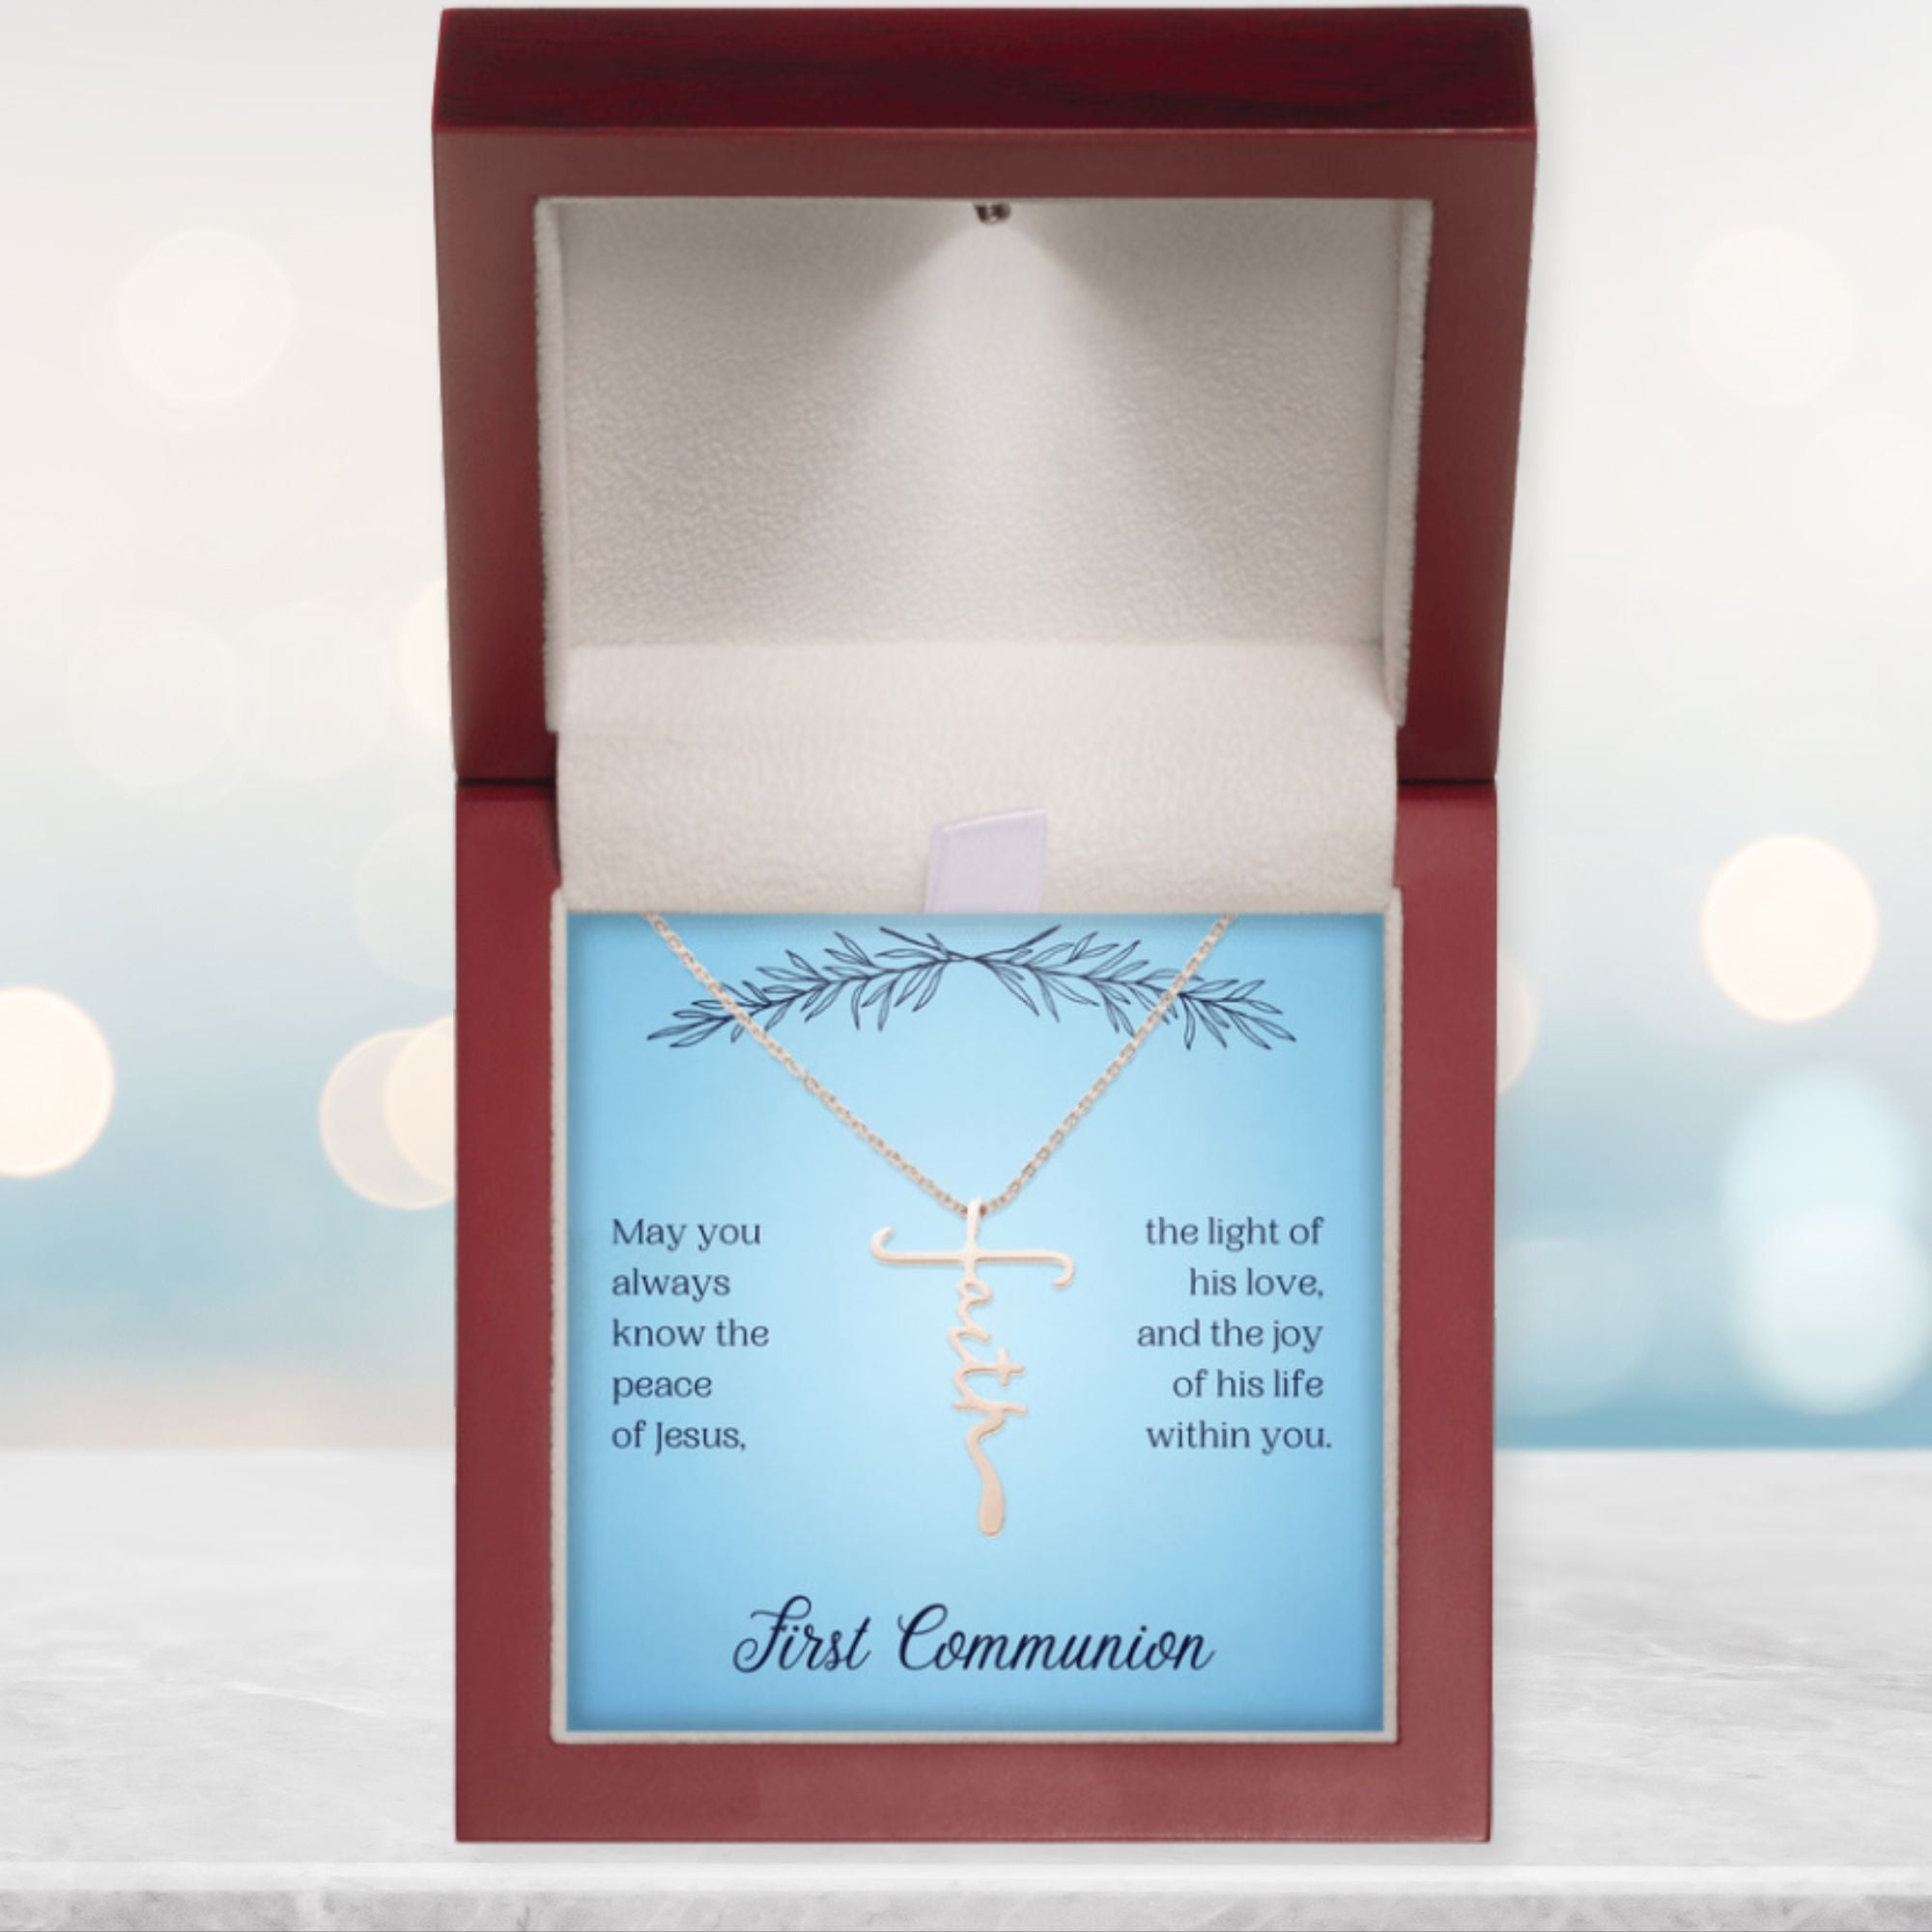 First Communion Faith Cross Necklace - May You Always Know The Peace of Jesus Box Type: Texture Magnetic Box Finish: Stainless Steel Jesus Passion Apparel